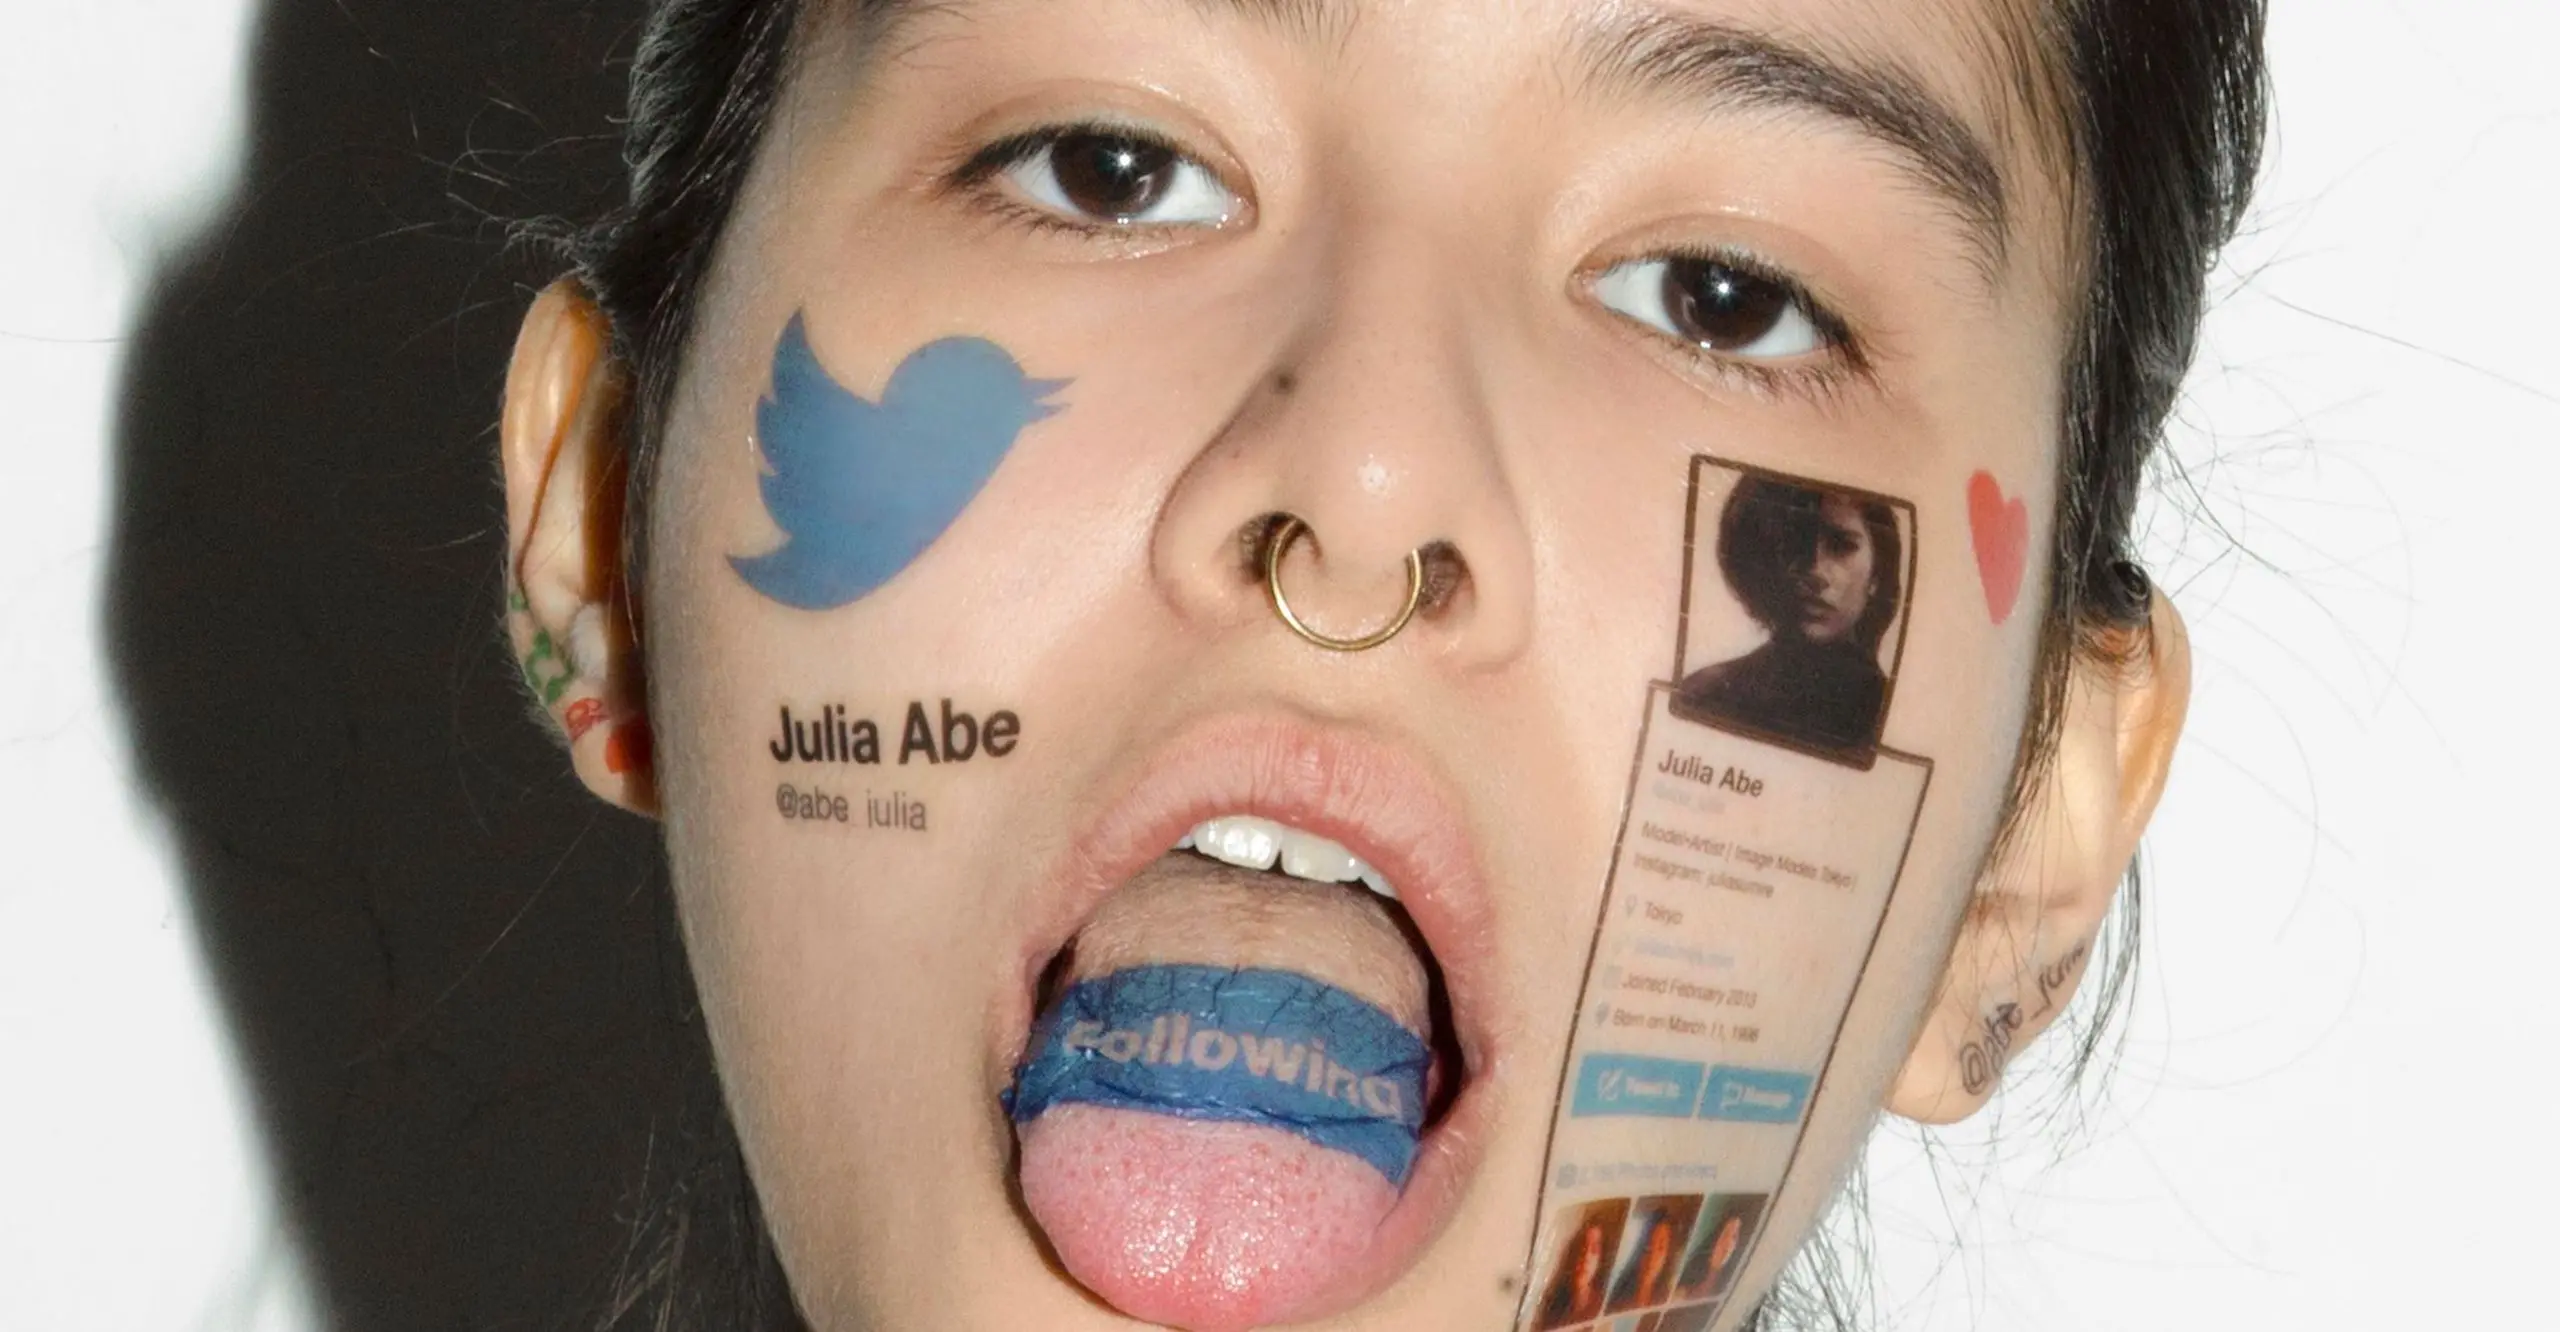 Photo of a person's face covered in twitter icons and logos, including their tongue which they are sticking out.